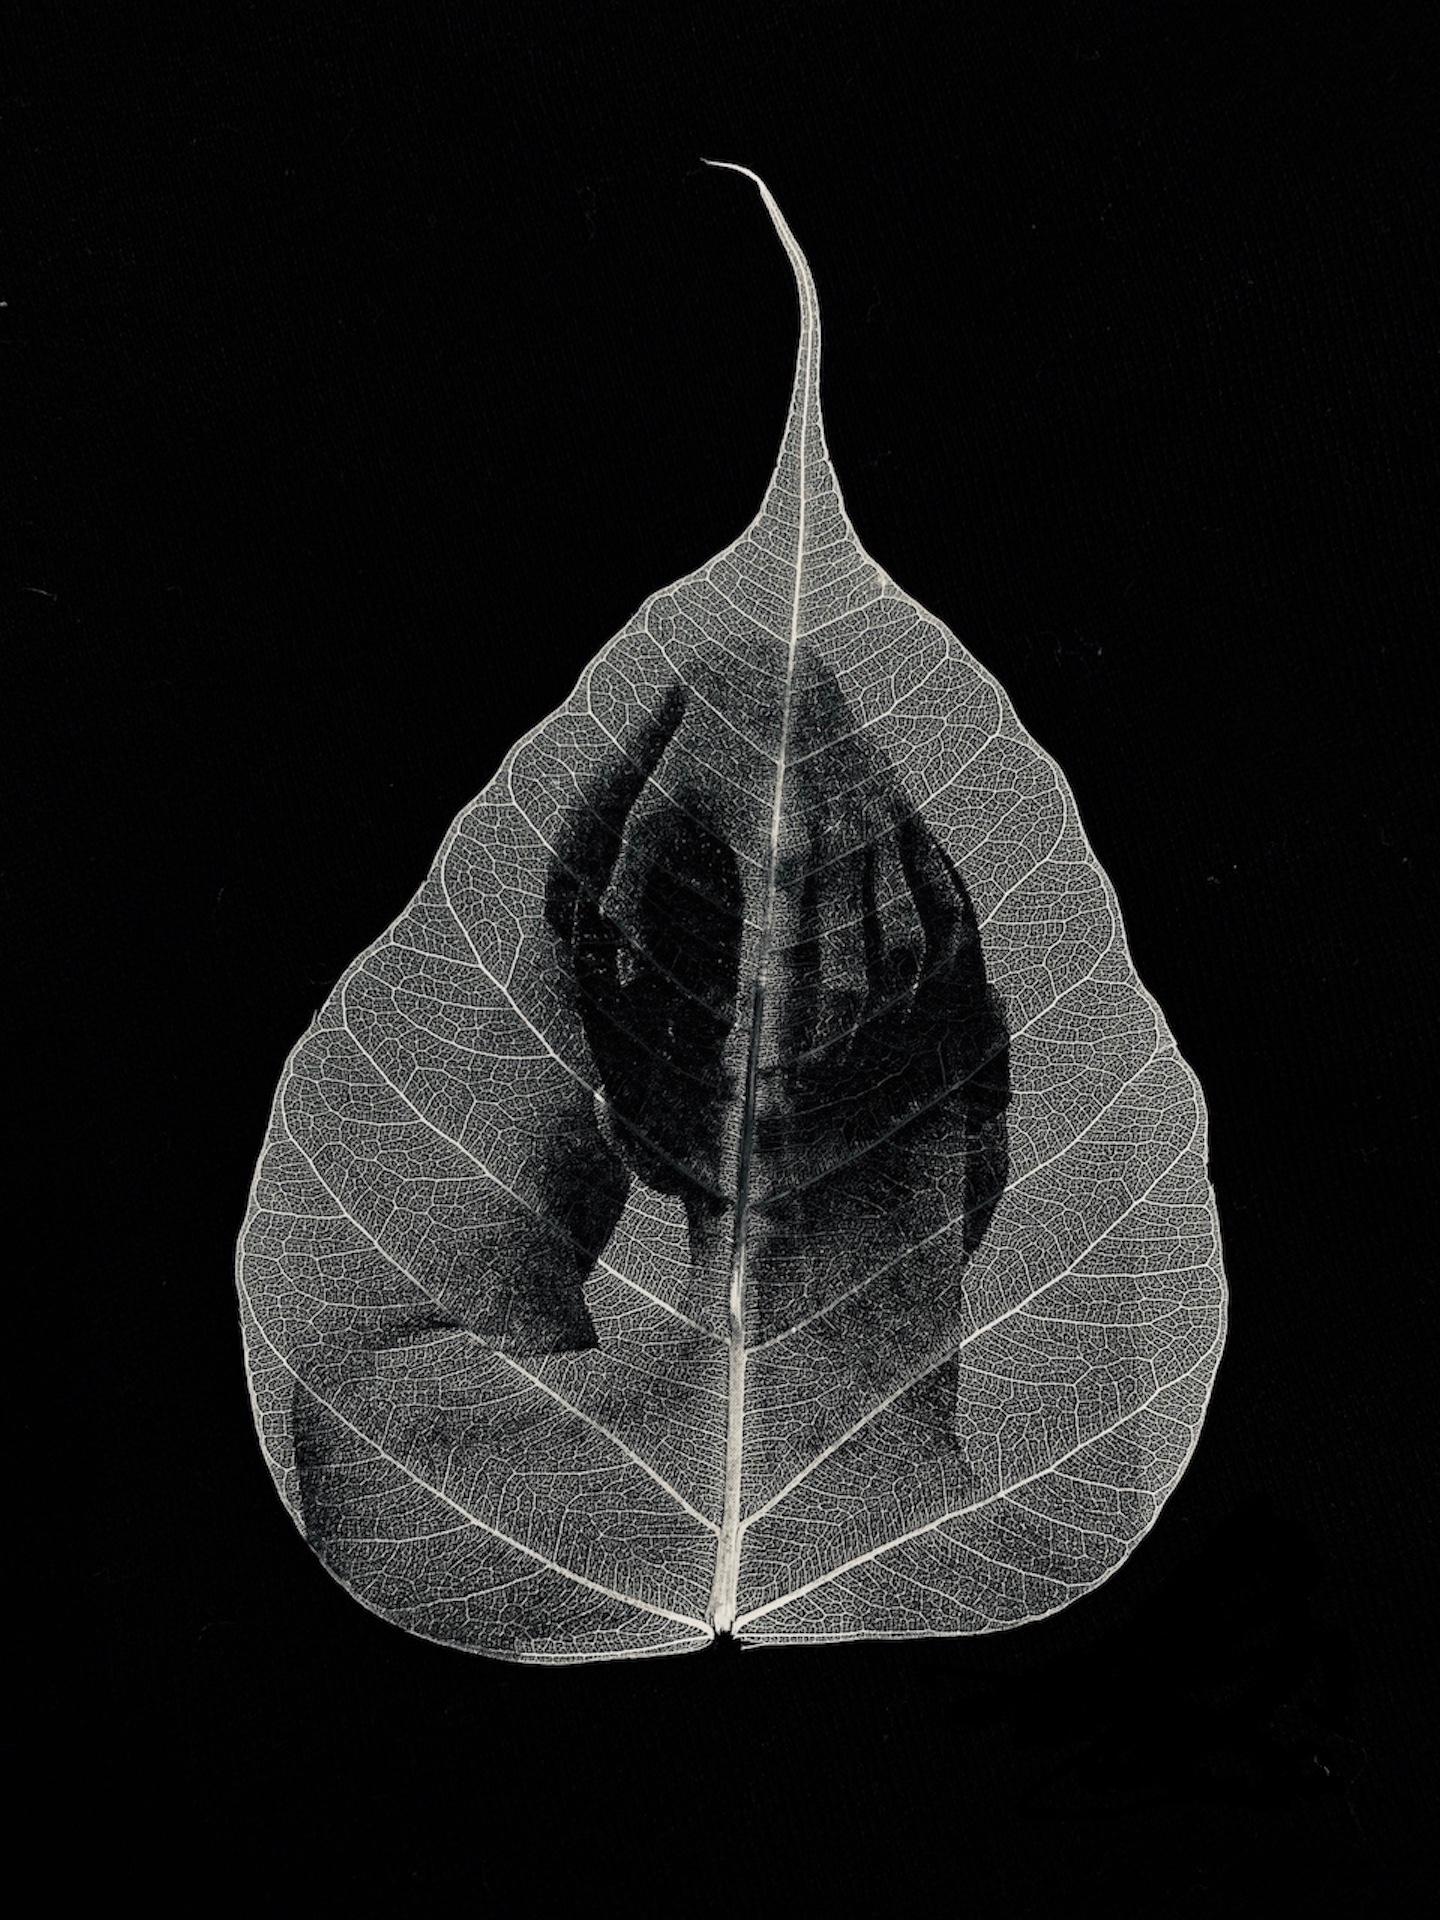 Samantha Bias Portrait Photograph - Head in hand -black and white transferred photograph on preserved skeleton leaf